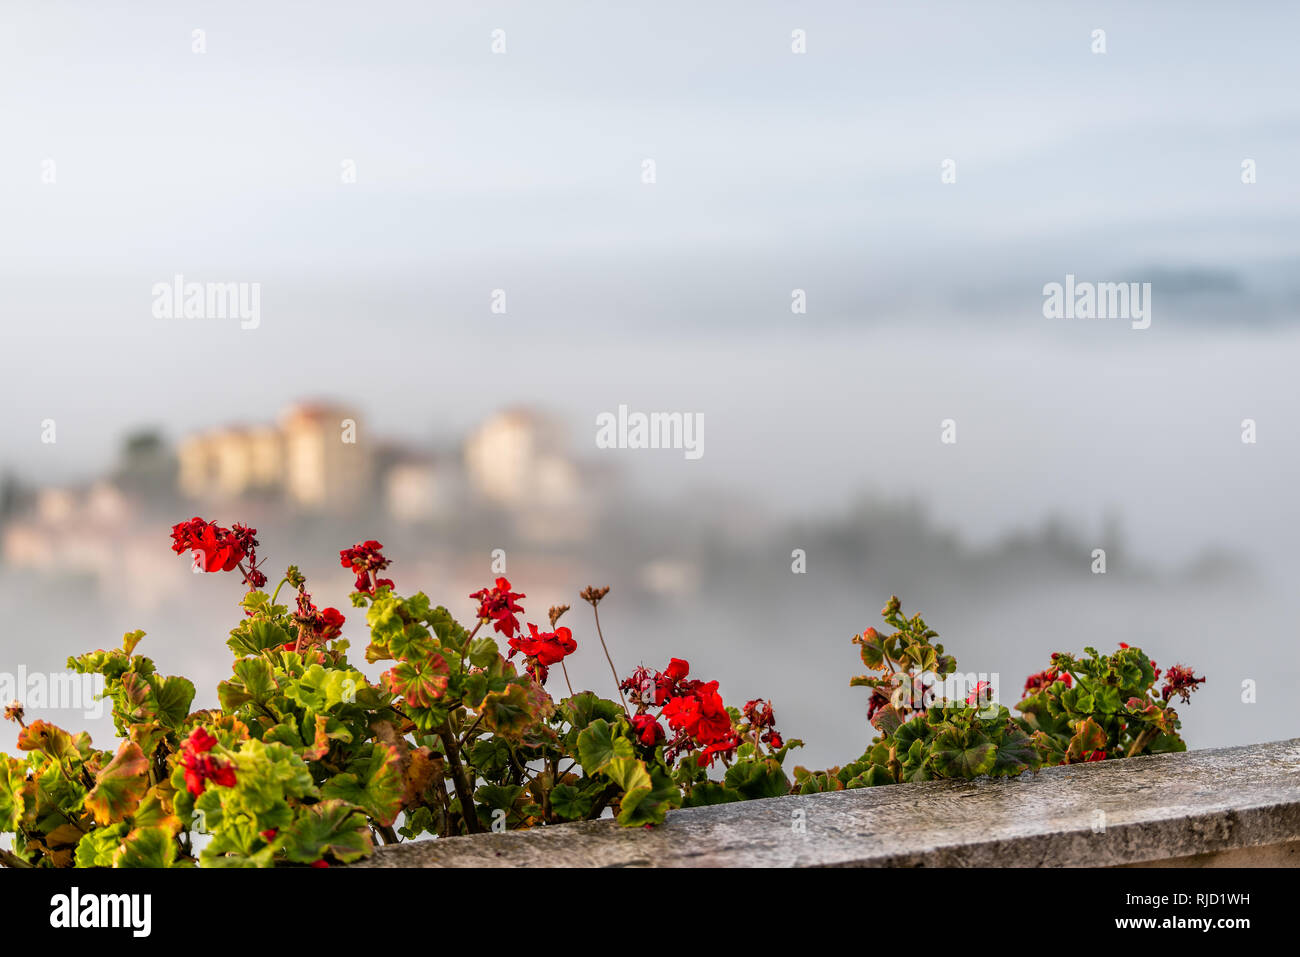 Chiusi Scalo mist fog sunrise of houses buildings in Umbria, Italy near Tuscany with clouds covering blanketing town cityscape and focus on flowers ga Stock Photo